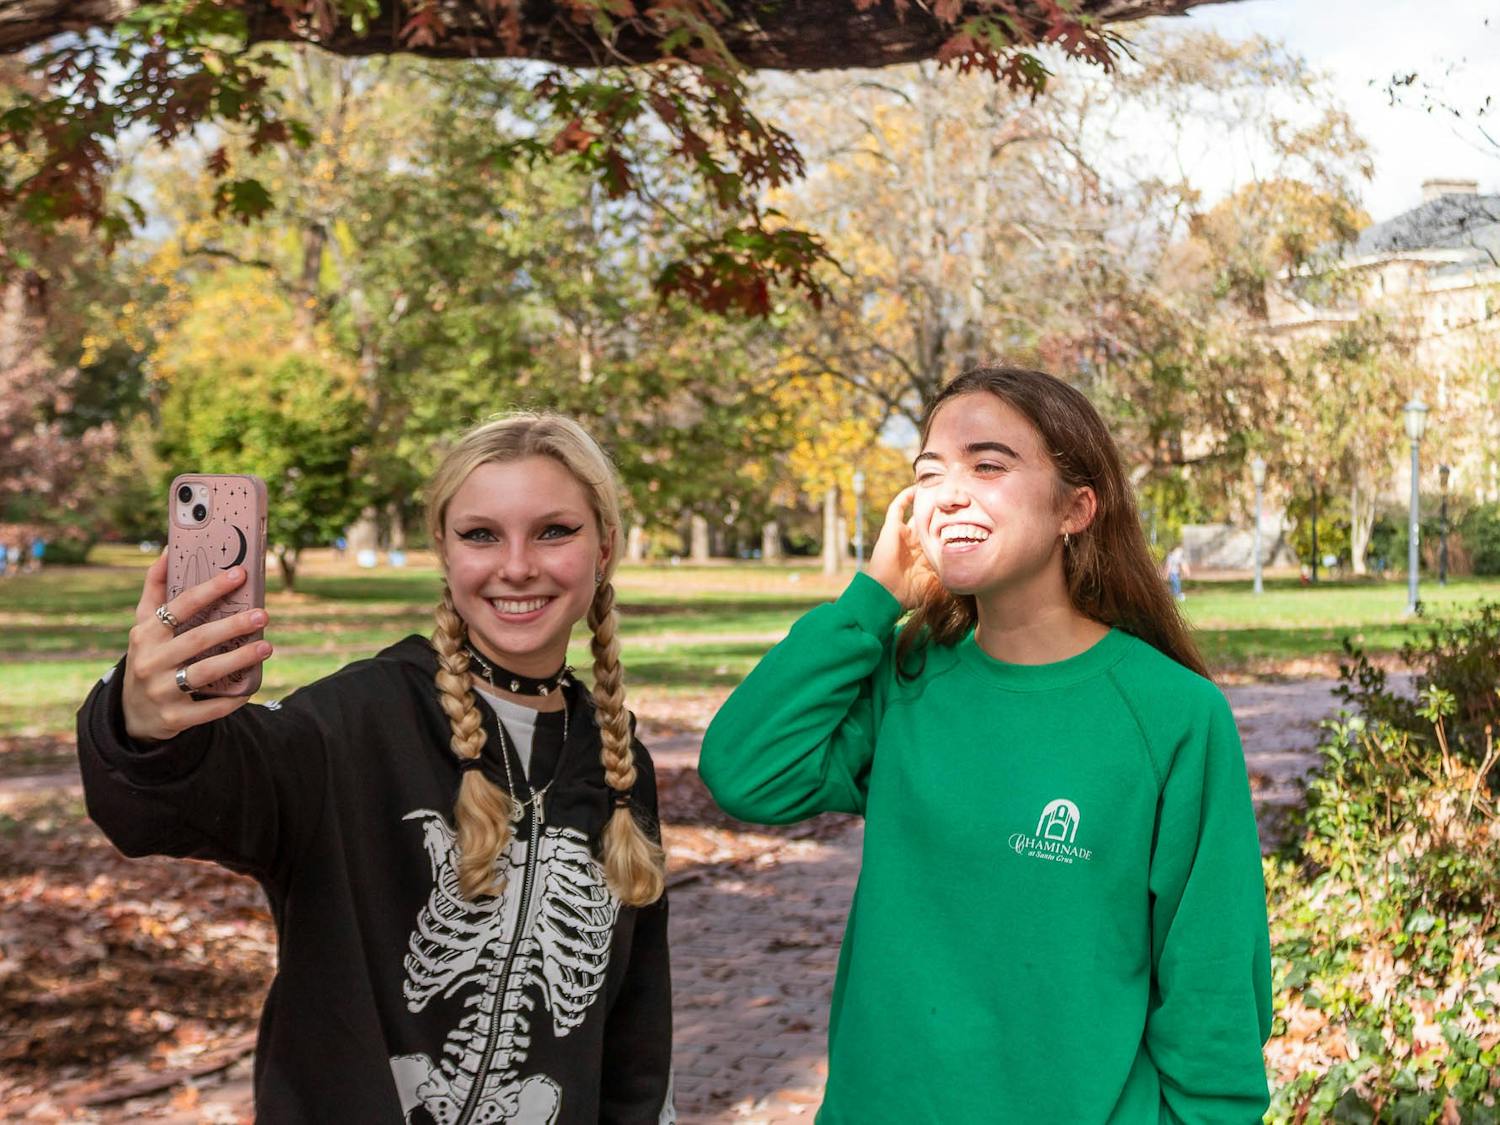 UNC first-year Mary Esposito and sophomore Ainsley Edwards pose together near the Old Well on Friday, Nov. 11, 2022.